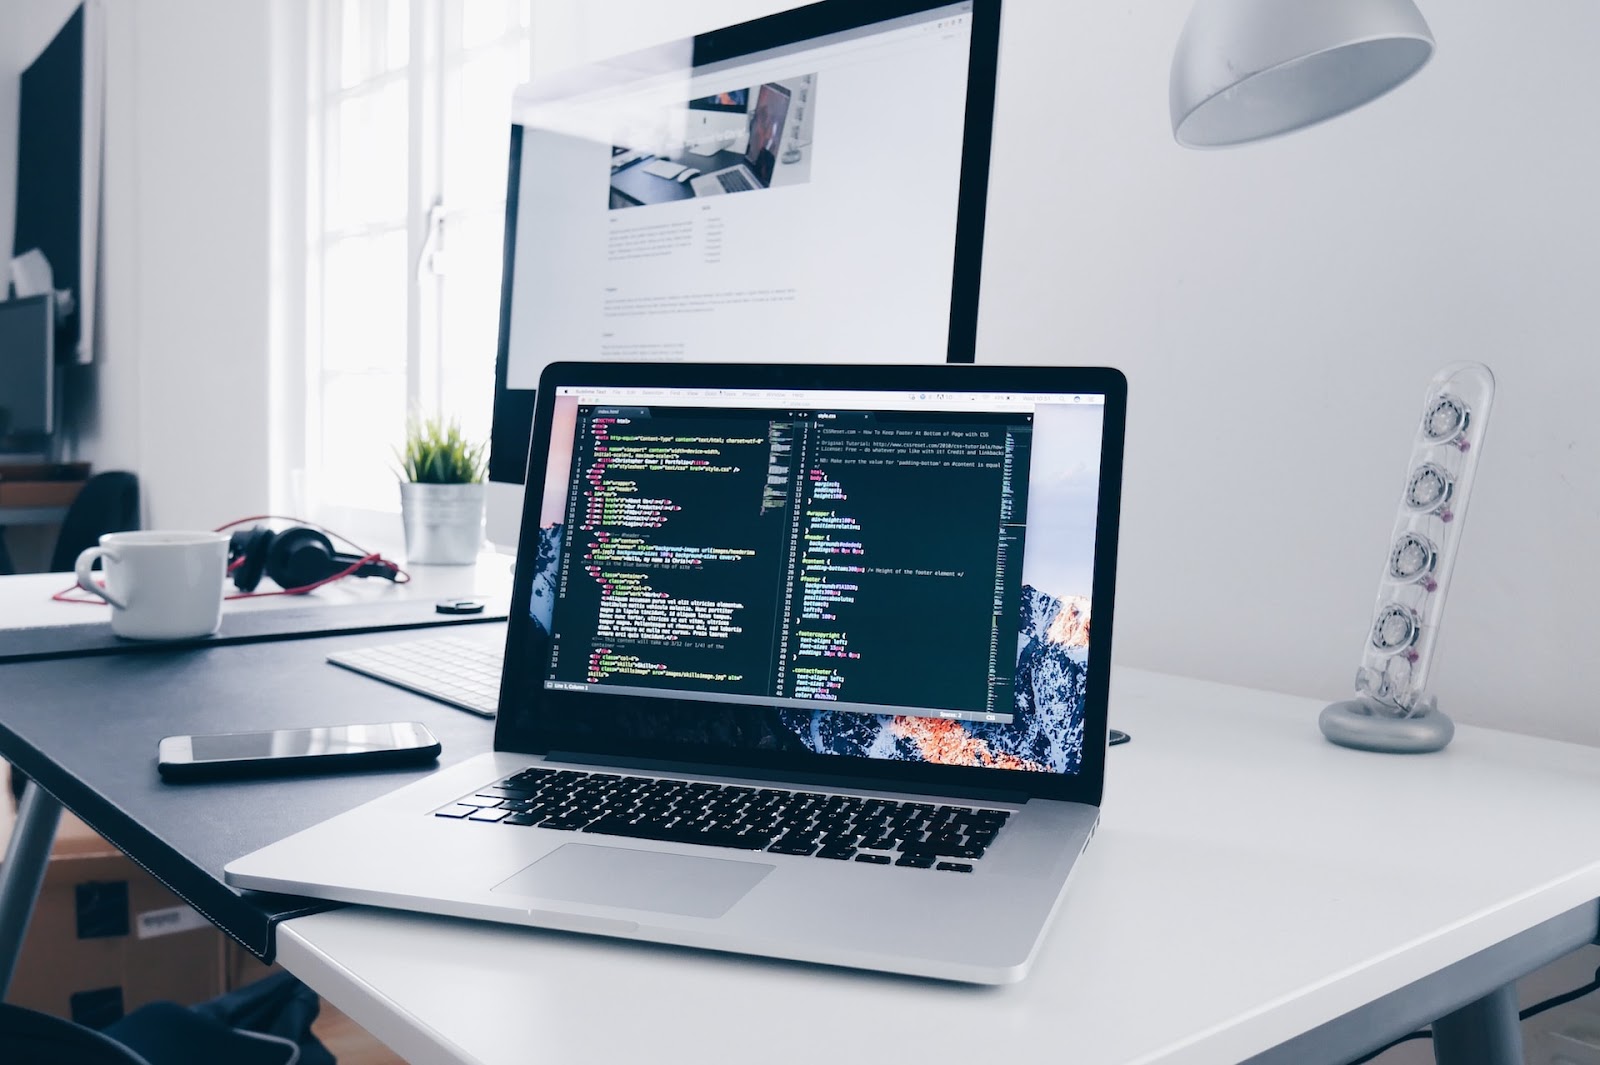 Photo by Christopher Gower on Unsplash - computer on desk showing code